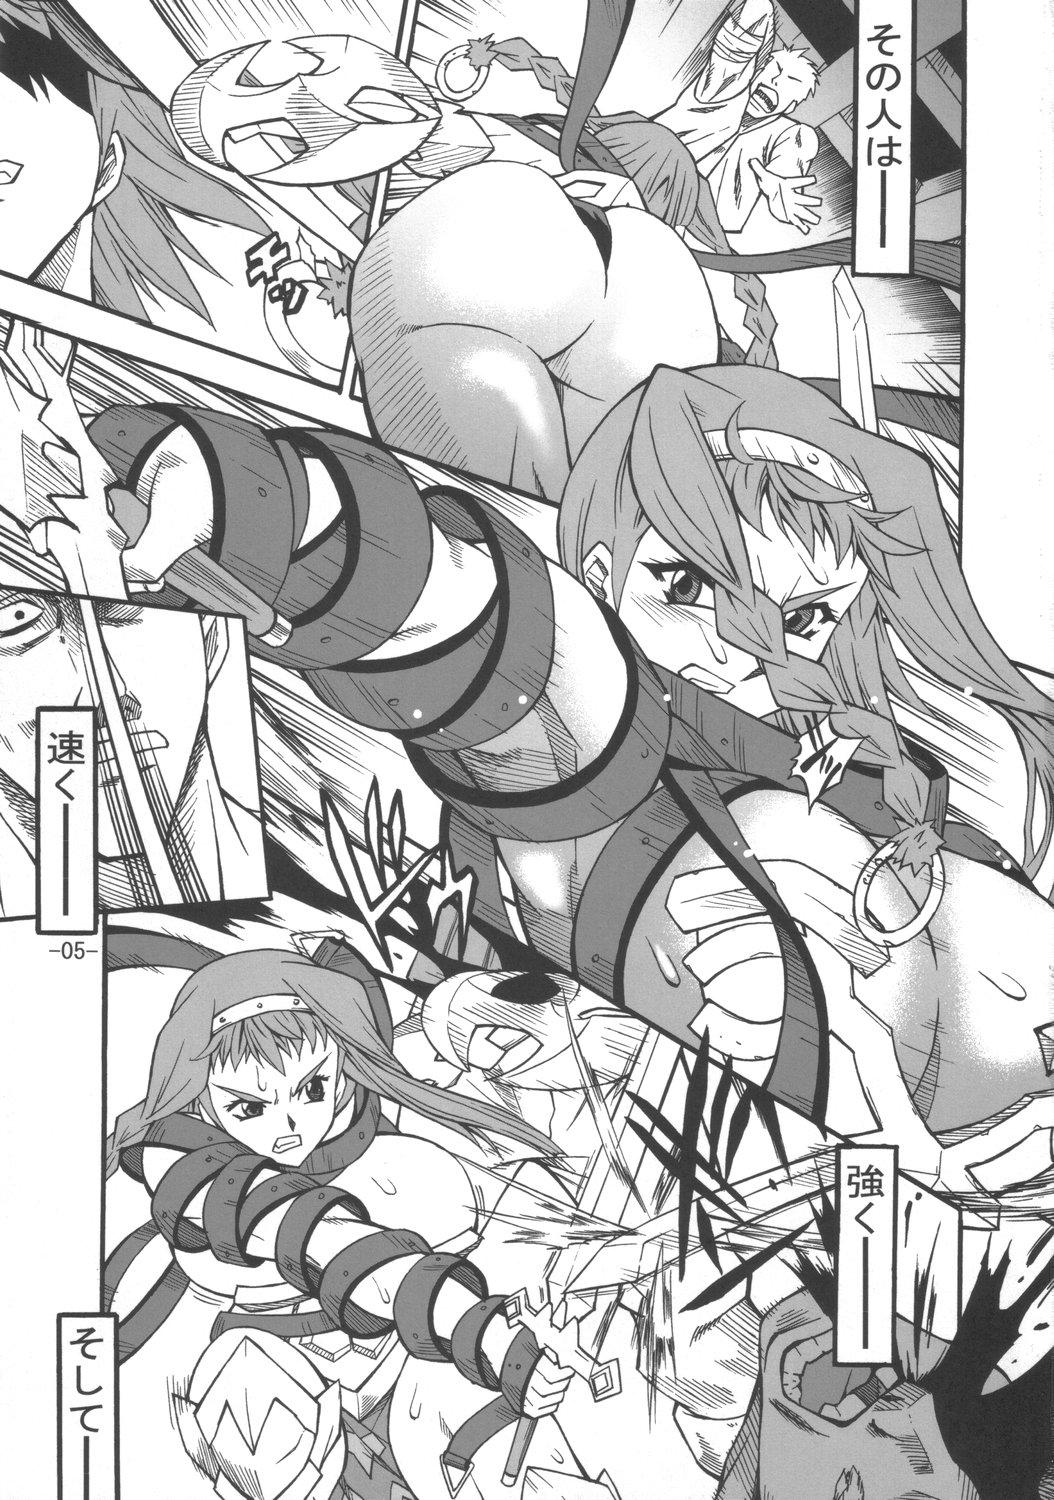 Busty kenkirei - Queens blade Doll - Page 4